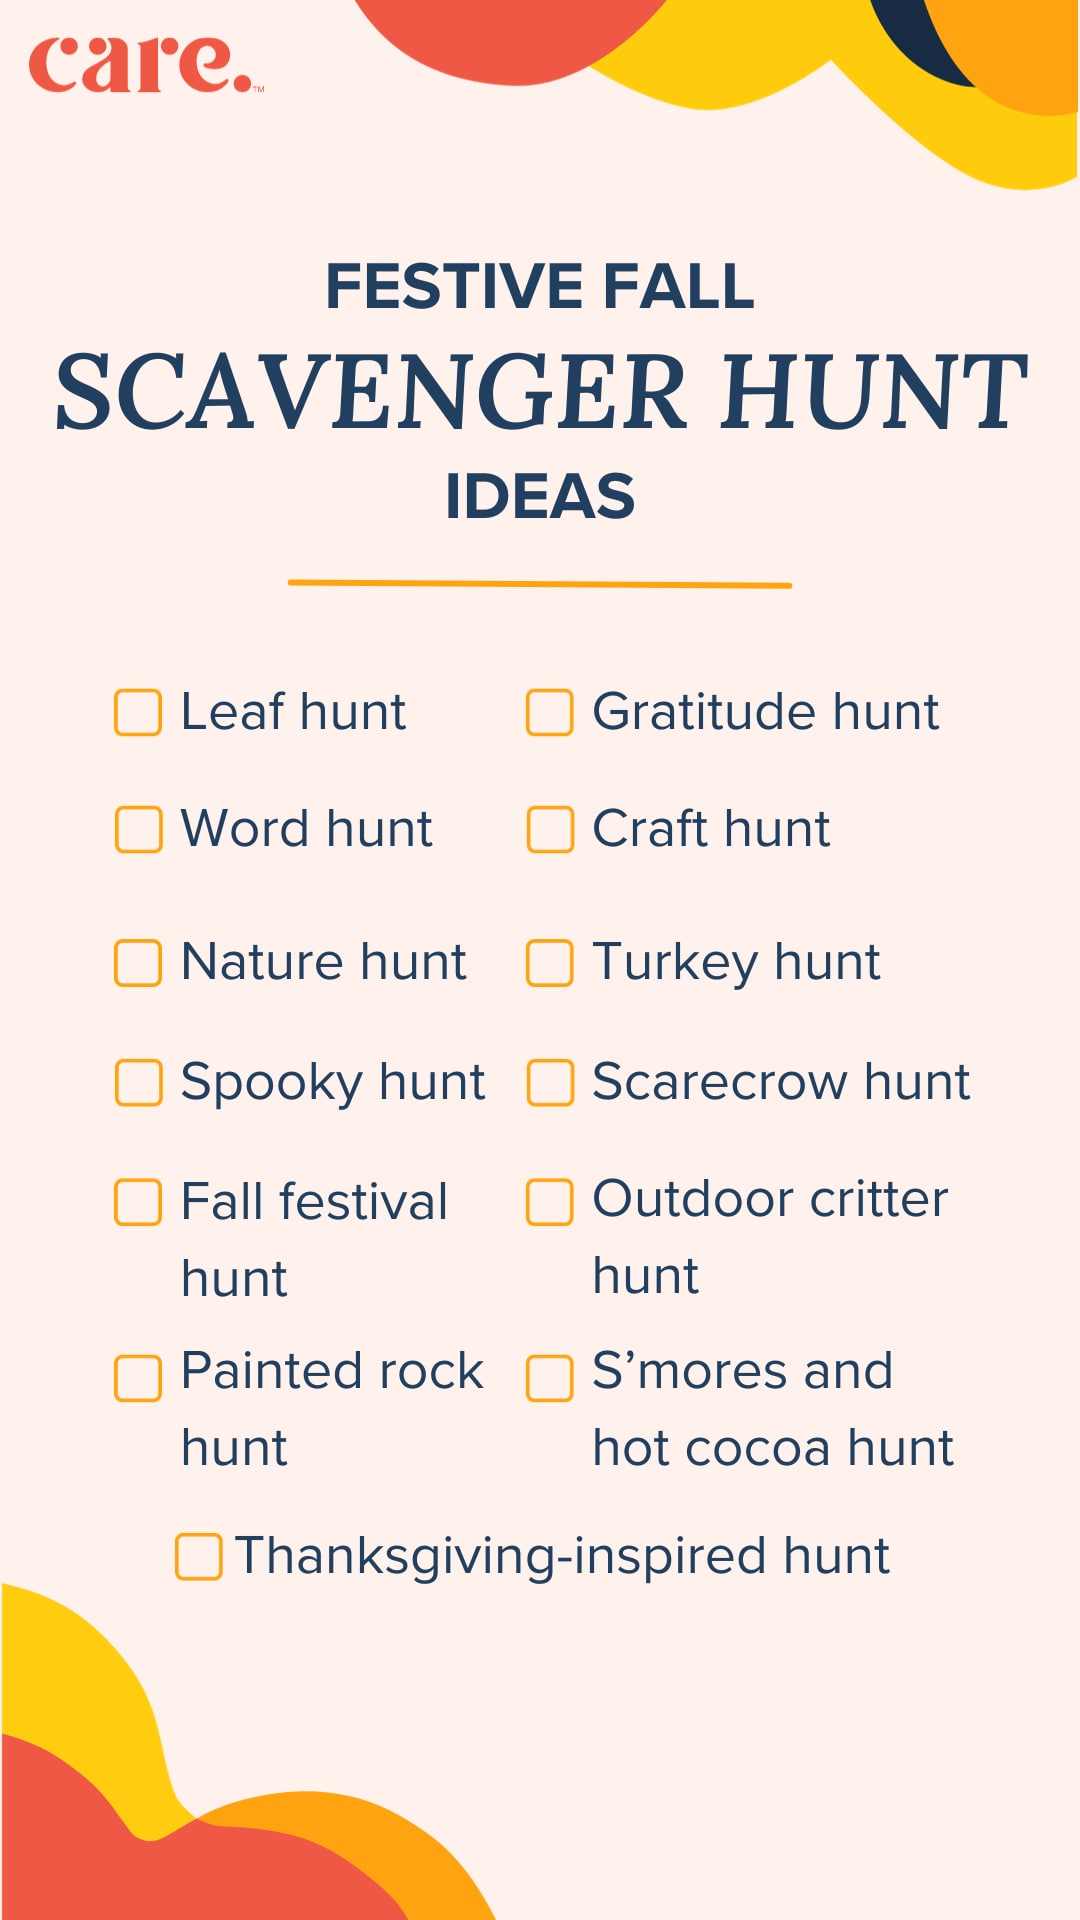 14 fall scavenger hunt ideas for kids that are as fun as they are festive